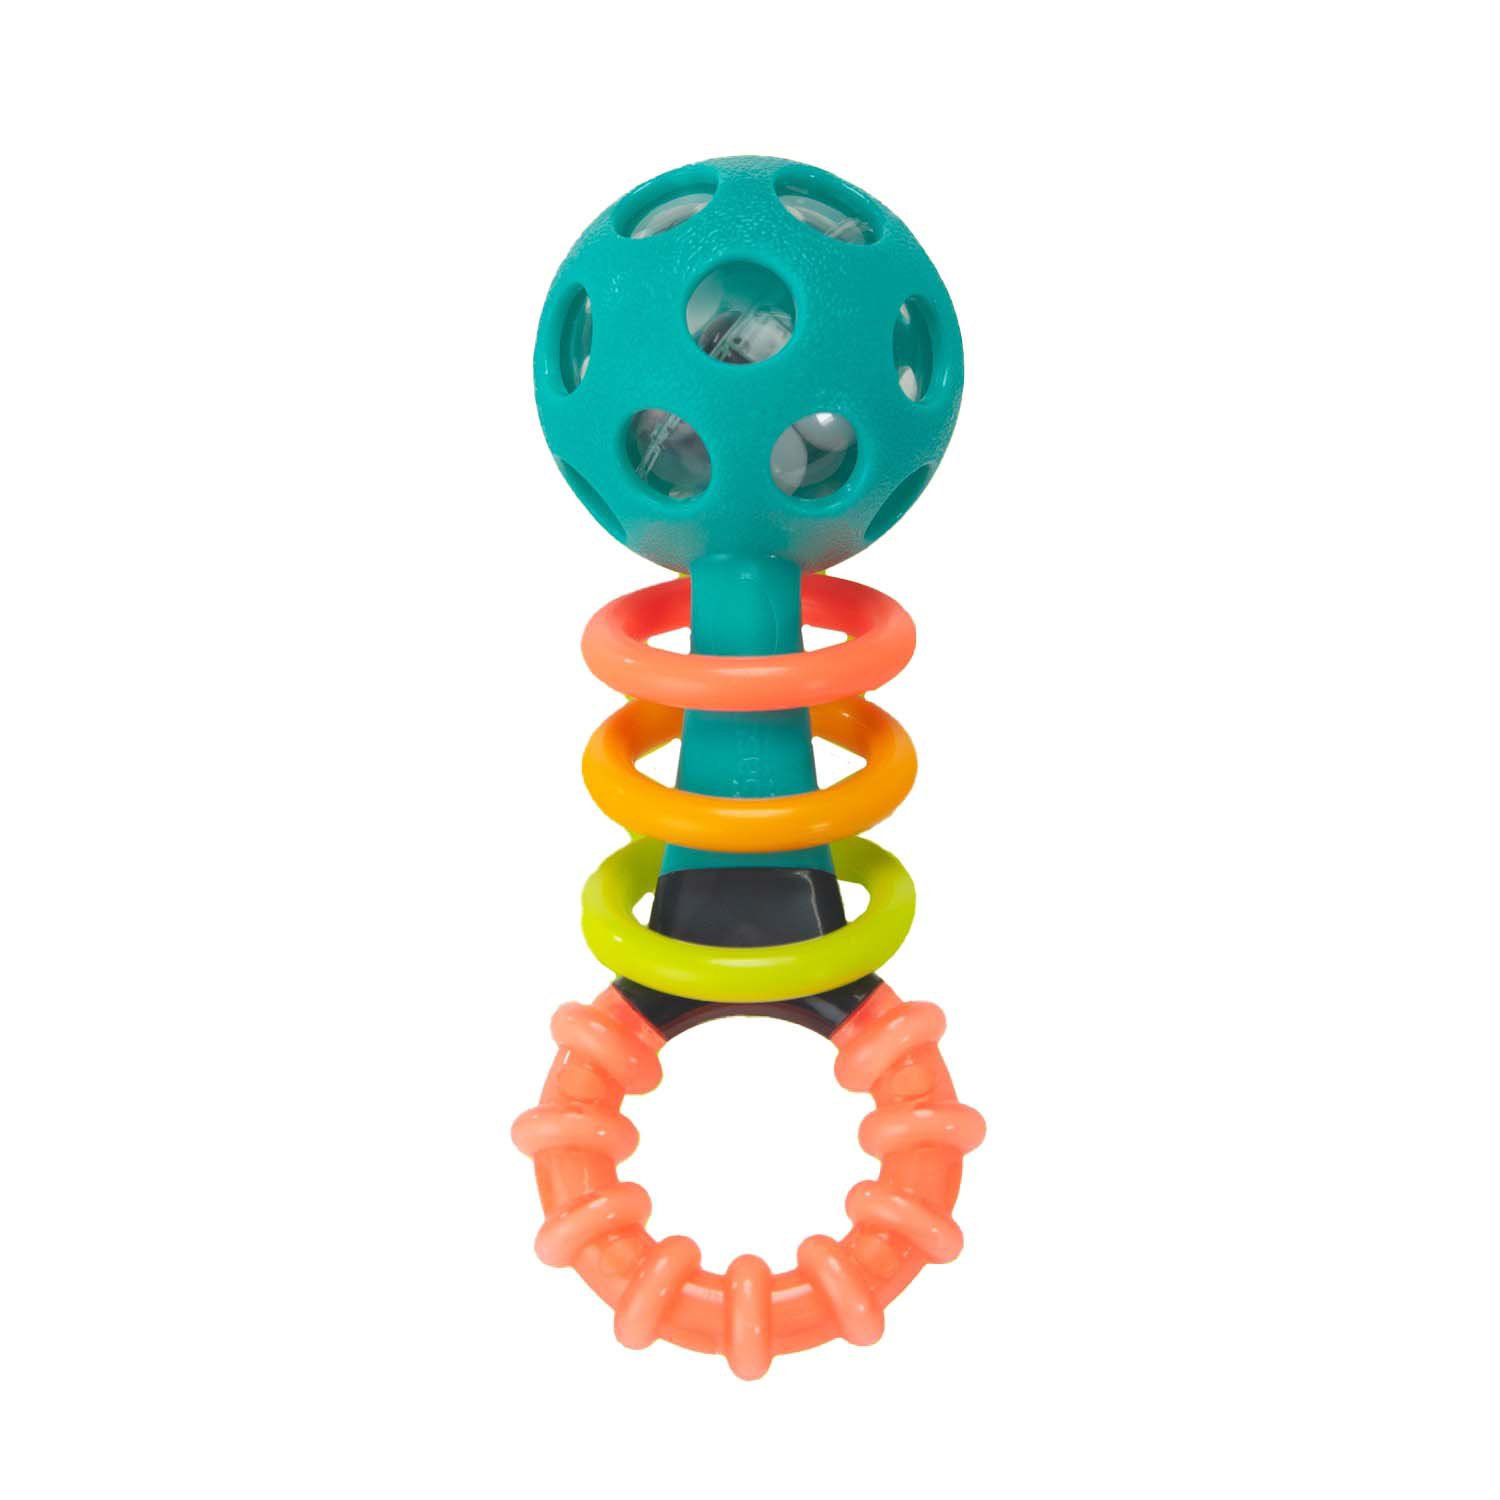 for Ages Newborn and Up Developmental Toy with High Contrast Colors Soft Plastic Sassy Peek-a-Boo Beads Rattle Flexible 